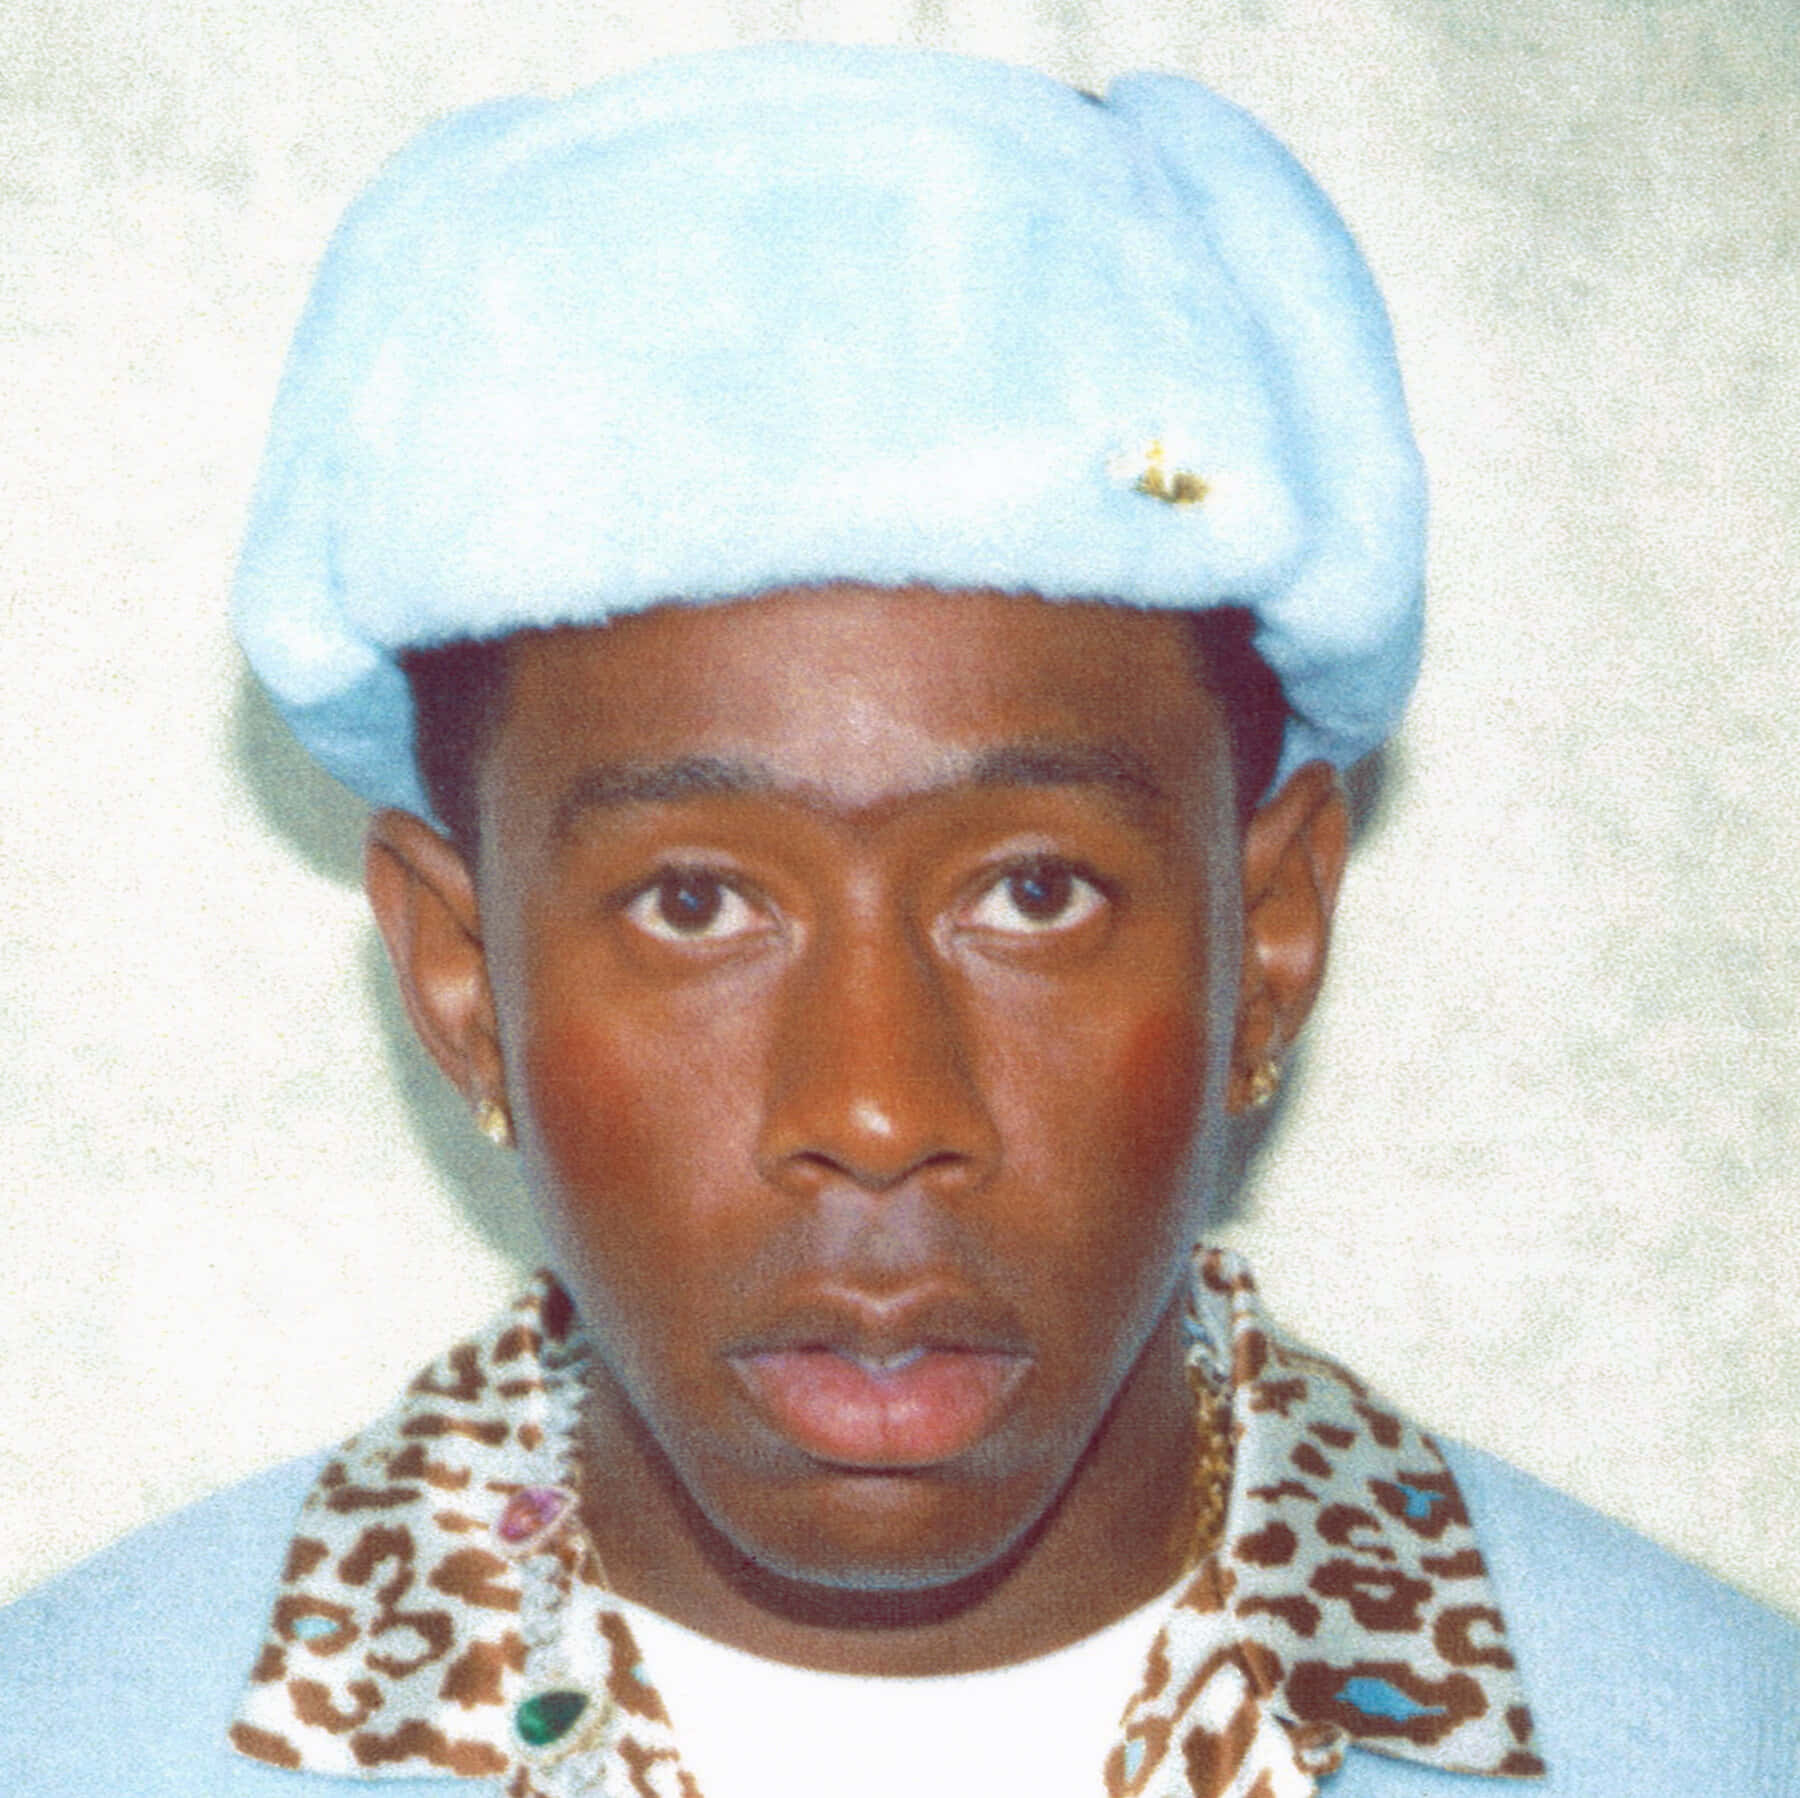 Tyler The Creator radiates confidence with a satisfied smile